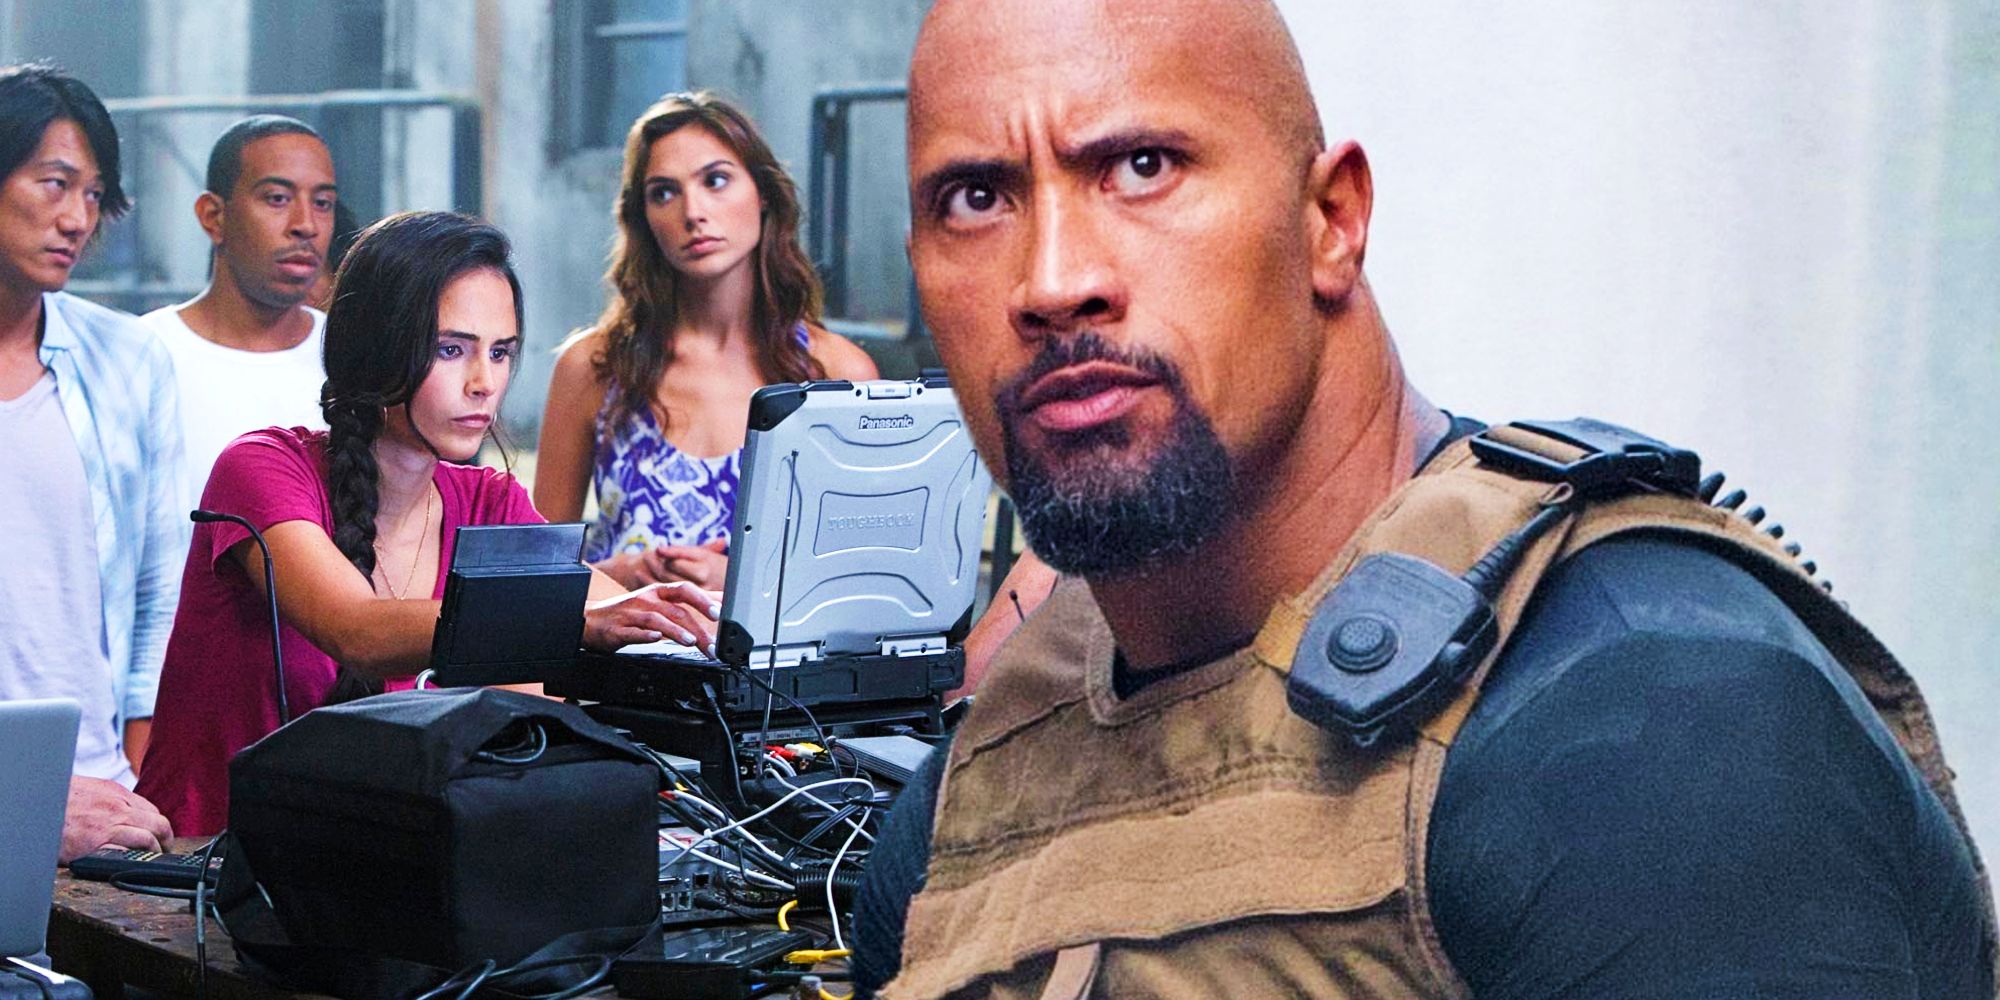 The cast of Fast Five and Dwayne Johnson as Hobbs